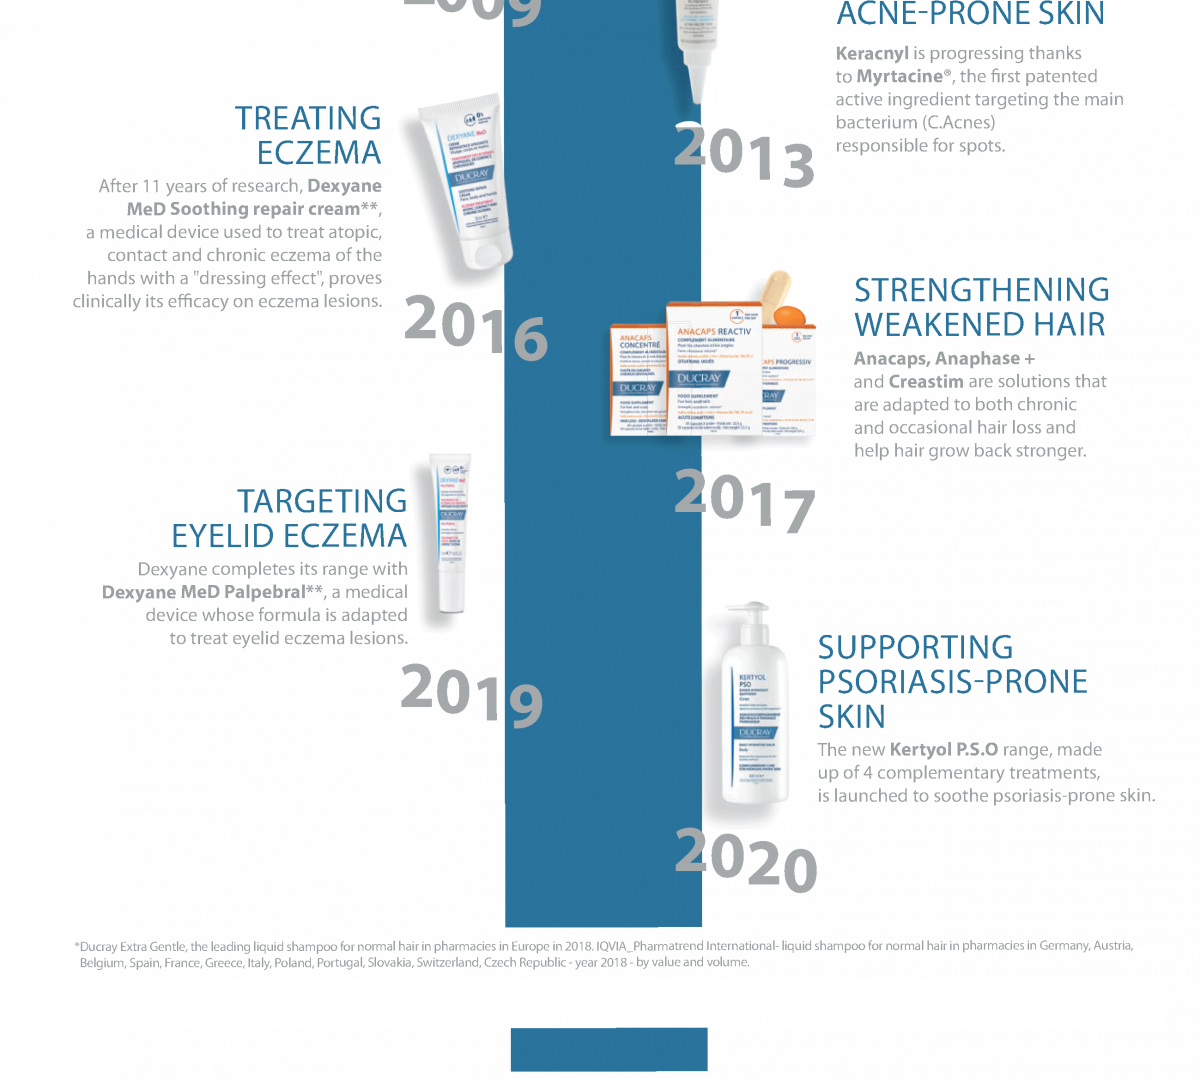 history of Laboratoires Dermatologiques Ducray: from the 2000s to the present day 